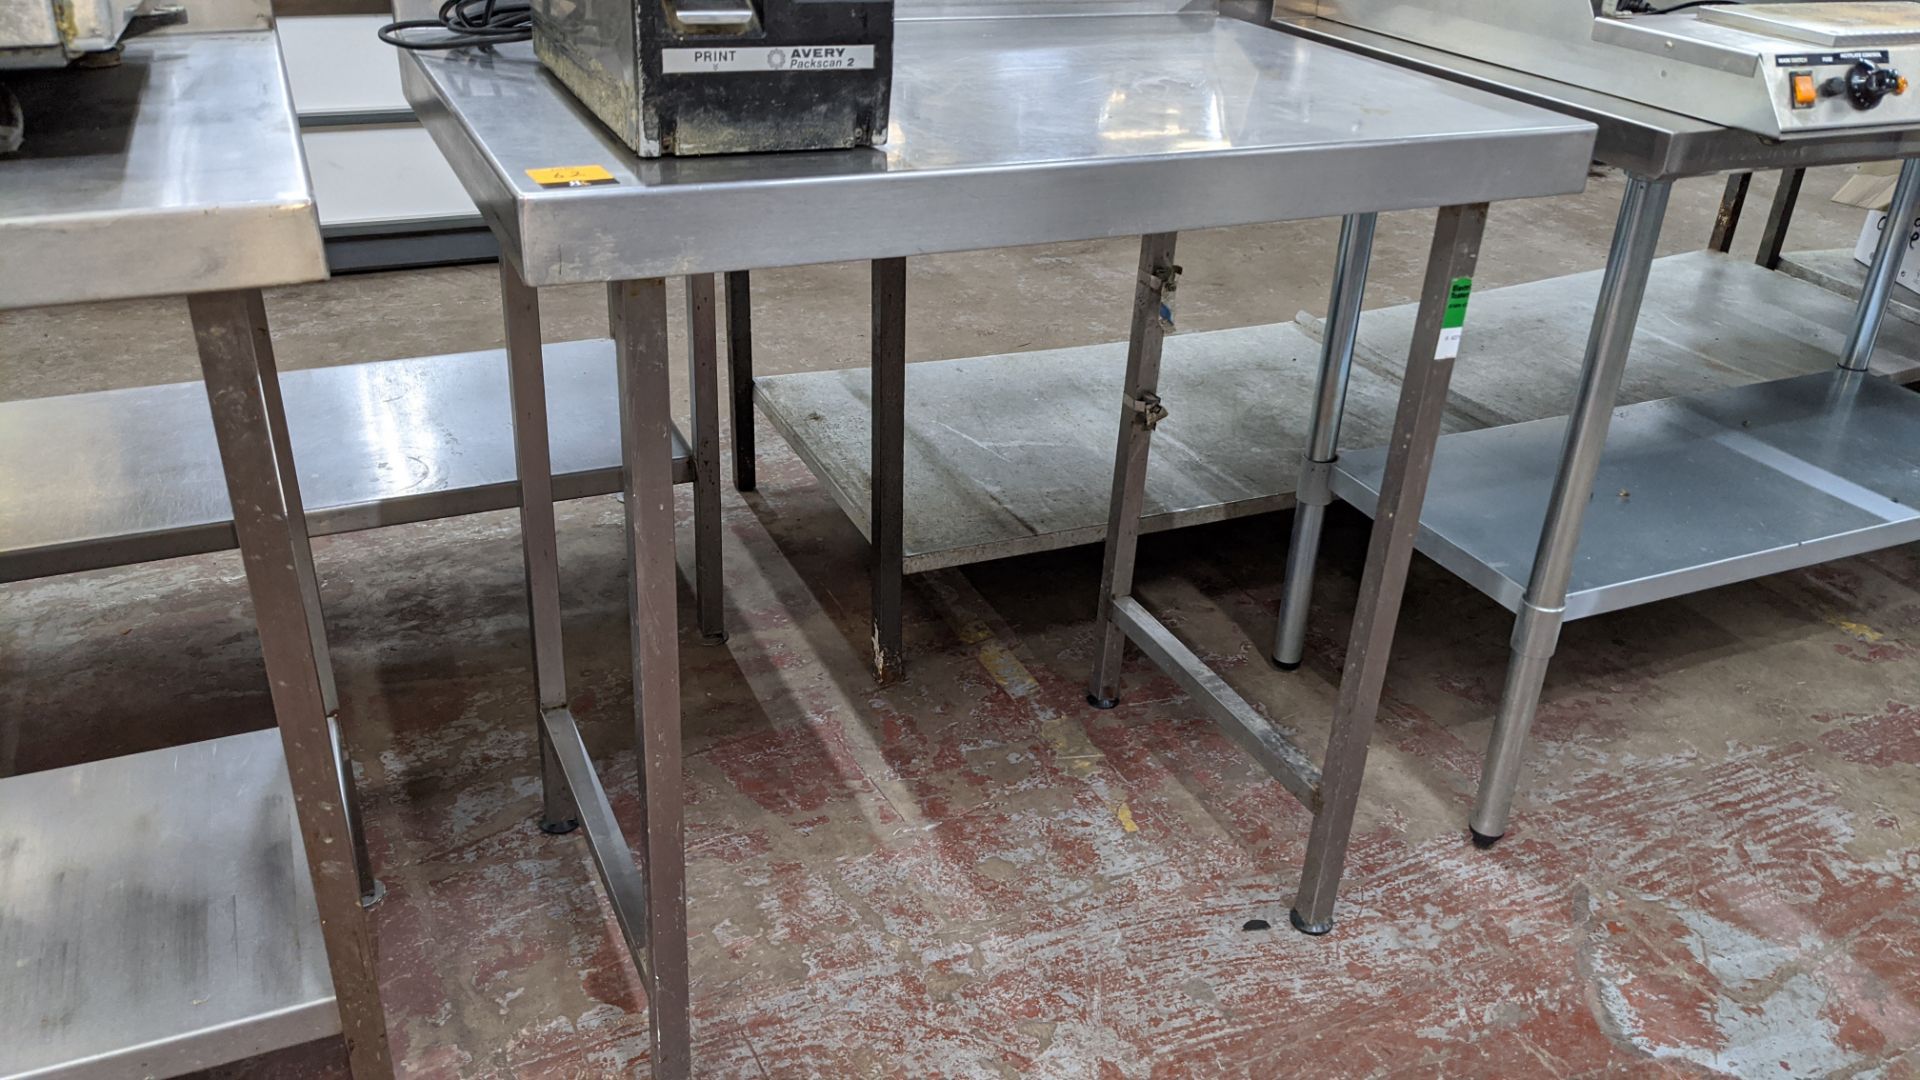 Stainless steel table, table top measuring approximately 900mm x 600mm